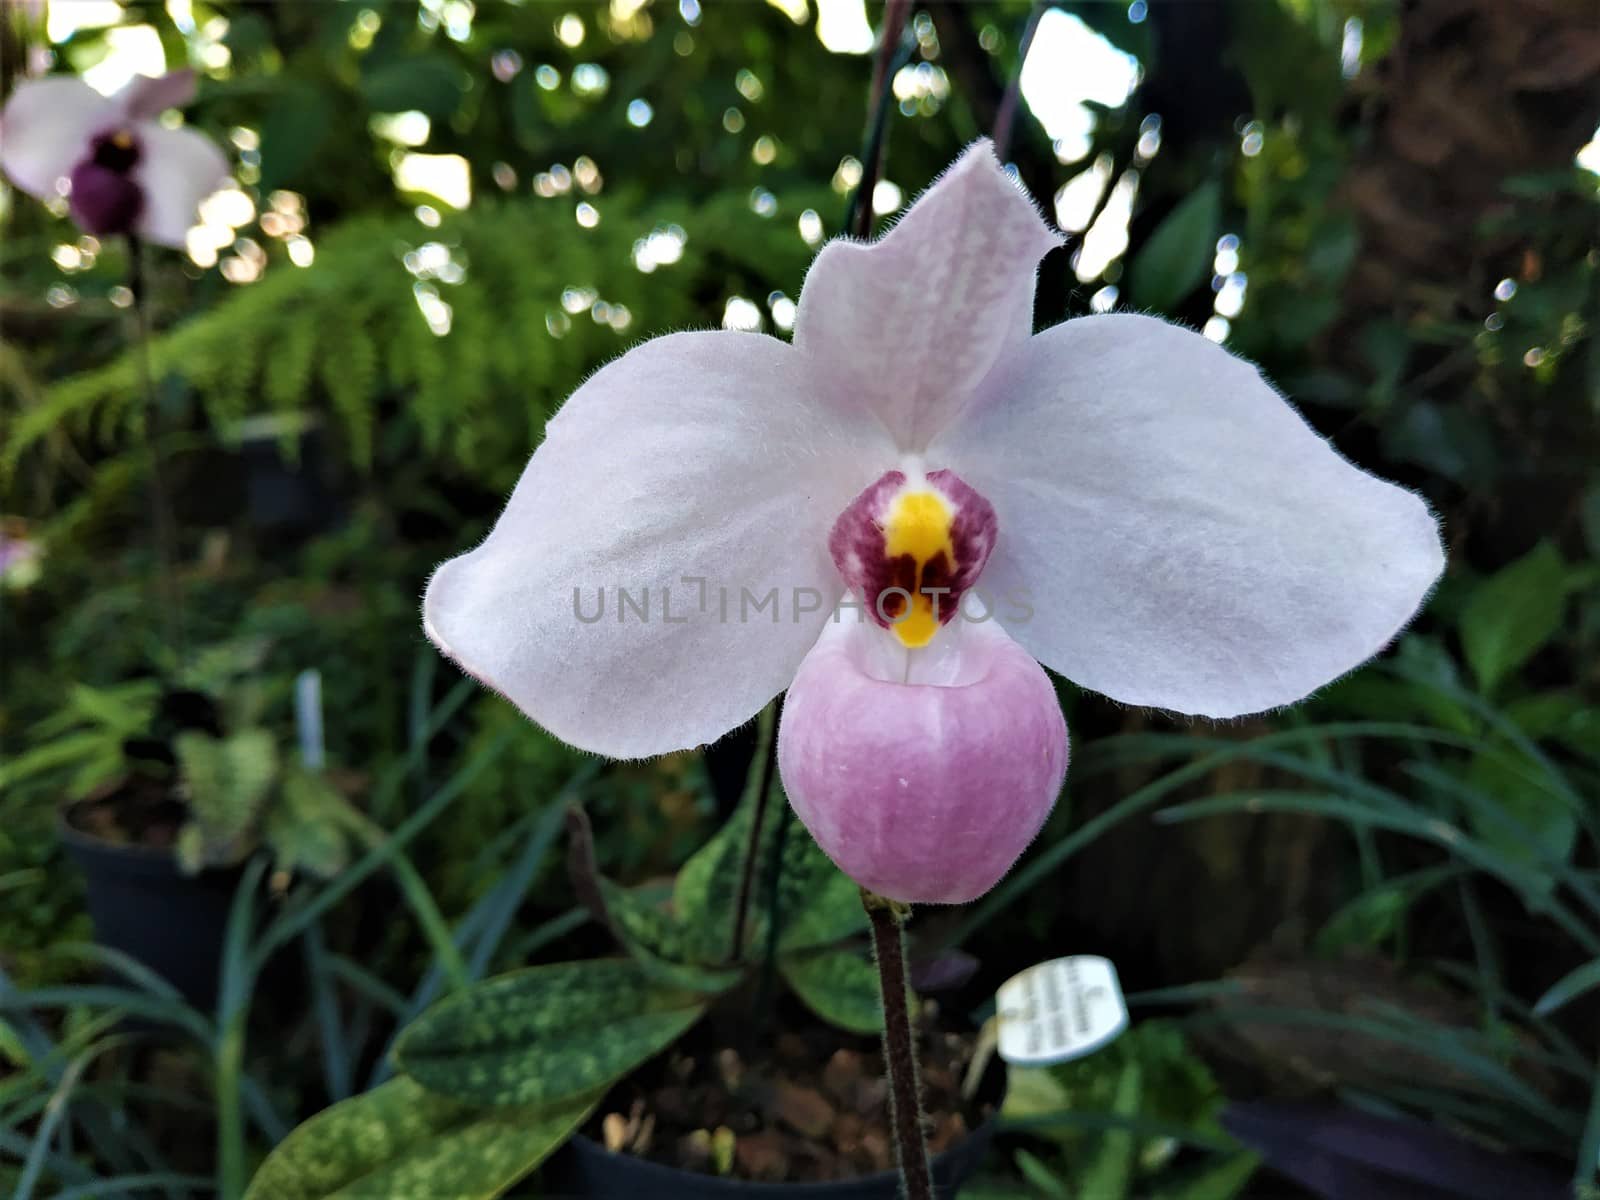 Paphiopedilum delenatii blooming with a shade of pink on the slipper by pisces2386